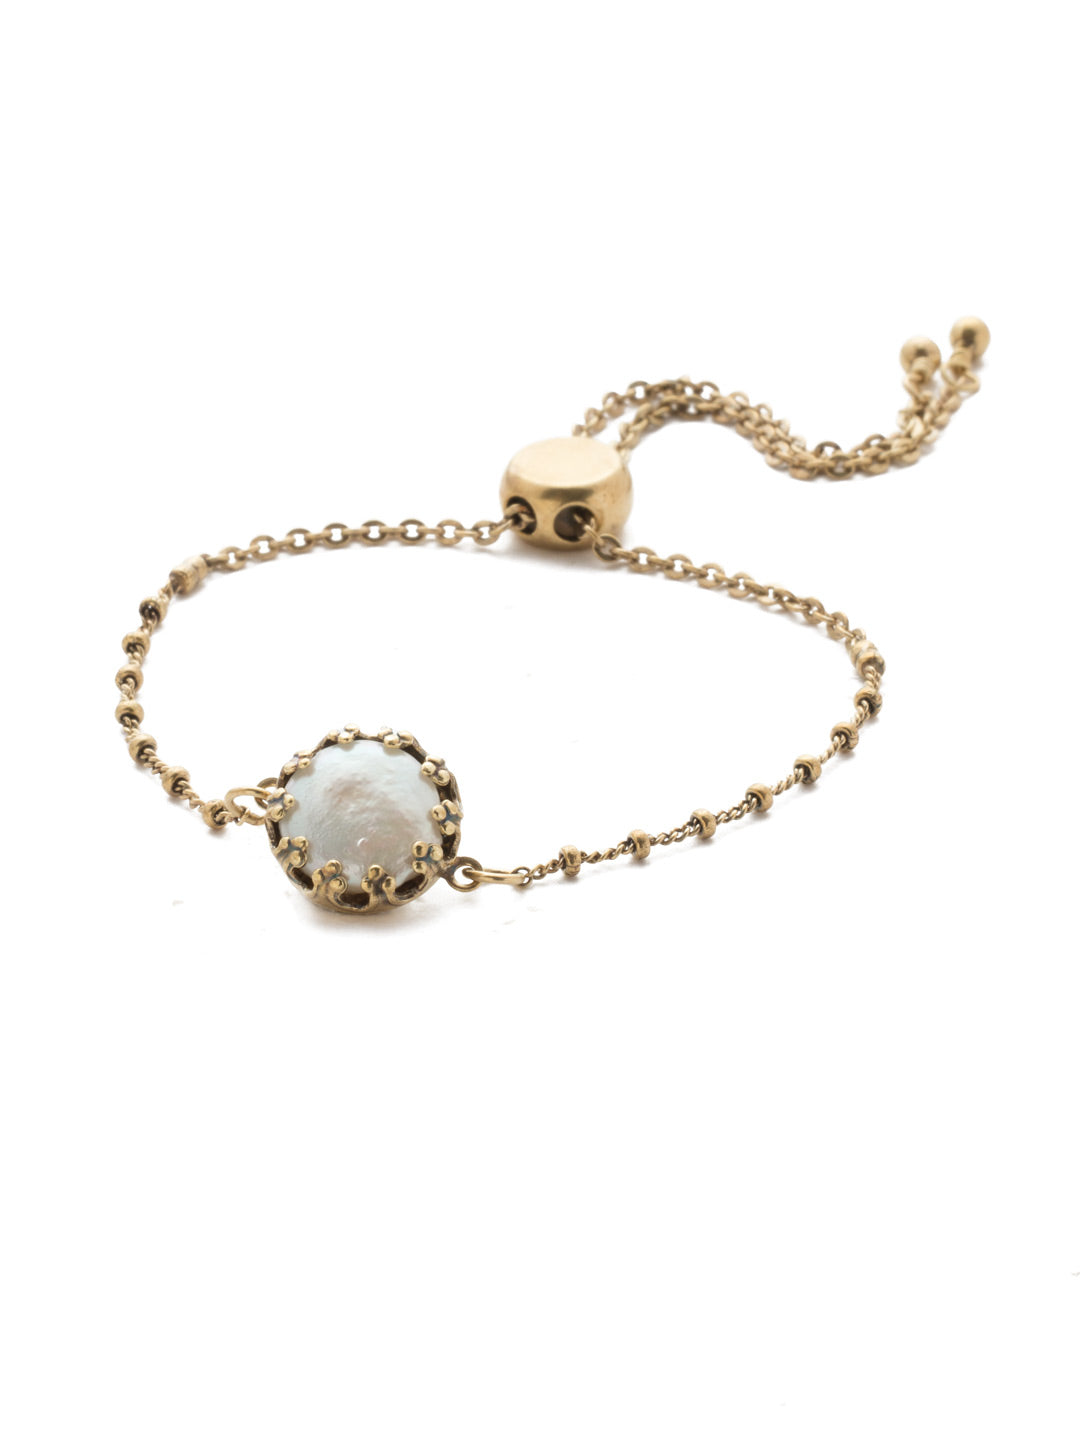 Delaney Slider Bracelet - BEN35AGIRB - <p>The Delaney Slider Bracelet is a classic. Anchored by an exquisite freshwater pearl, and paired with delicate metal detail, it's a stand-out everyone will love. From Sorrelli's Iris Bloom collection in our Antique Gold-tone finish.</p>